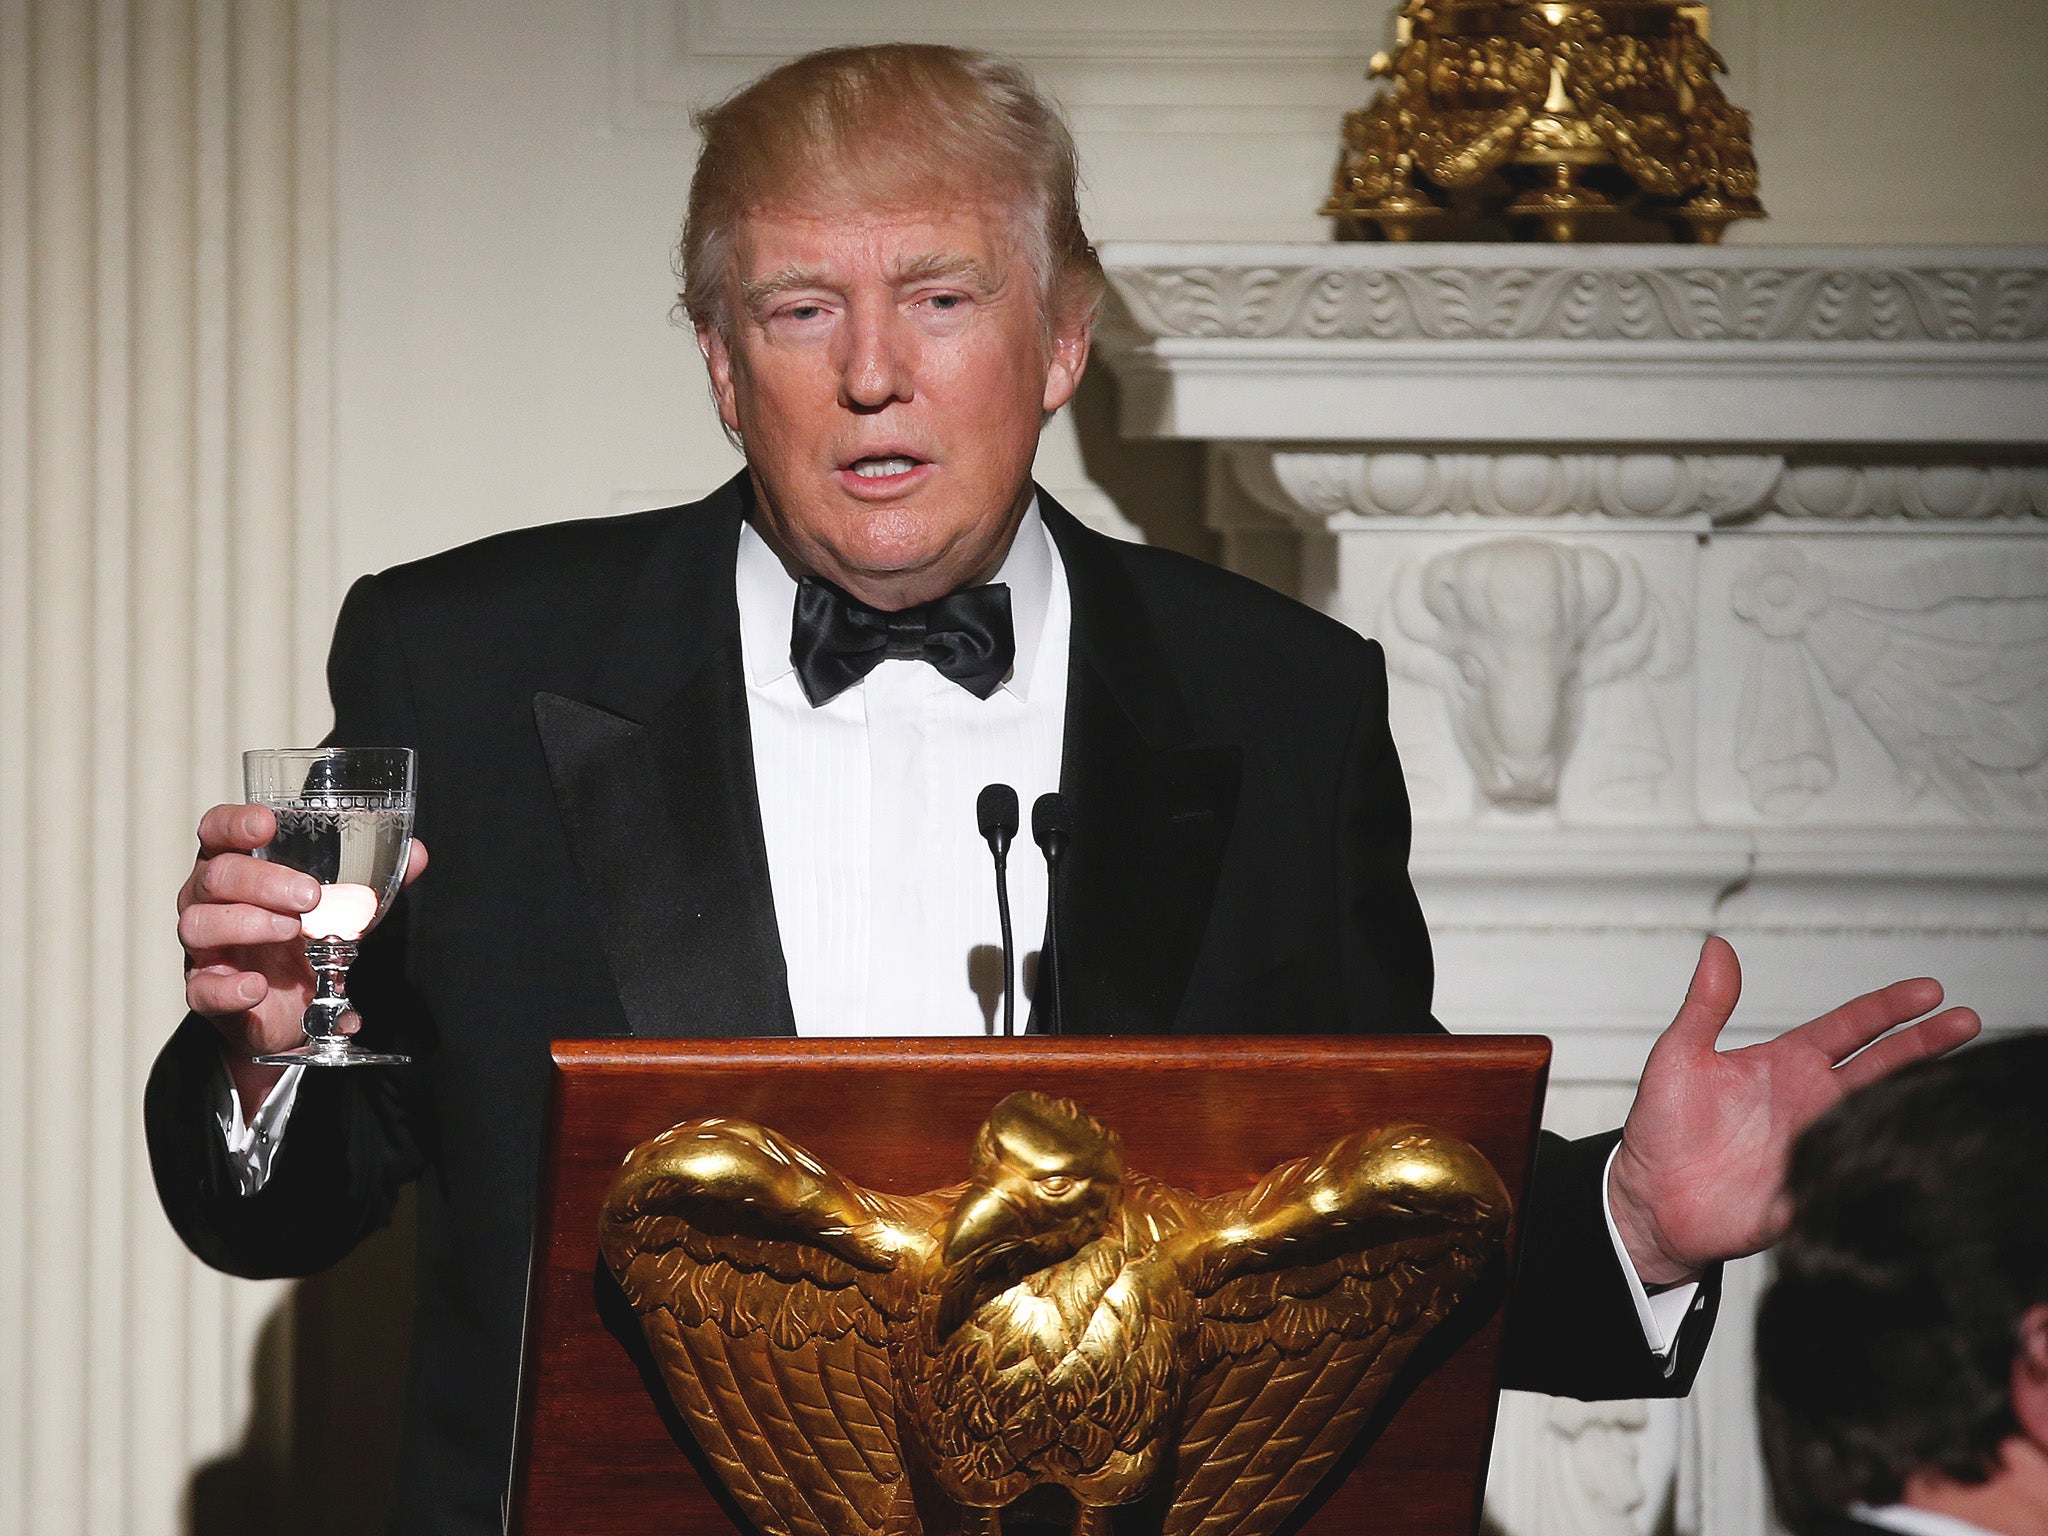 President Donald Trump makes a toast during the Governor's Ball